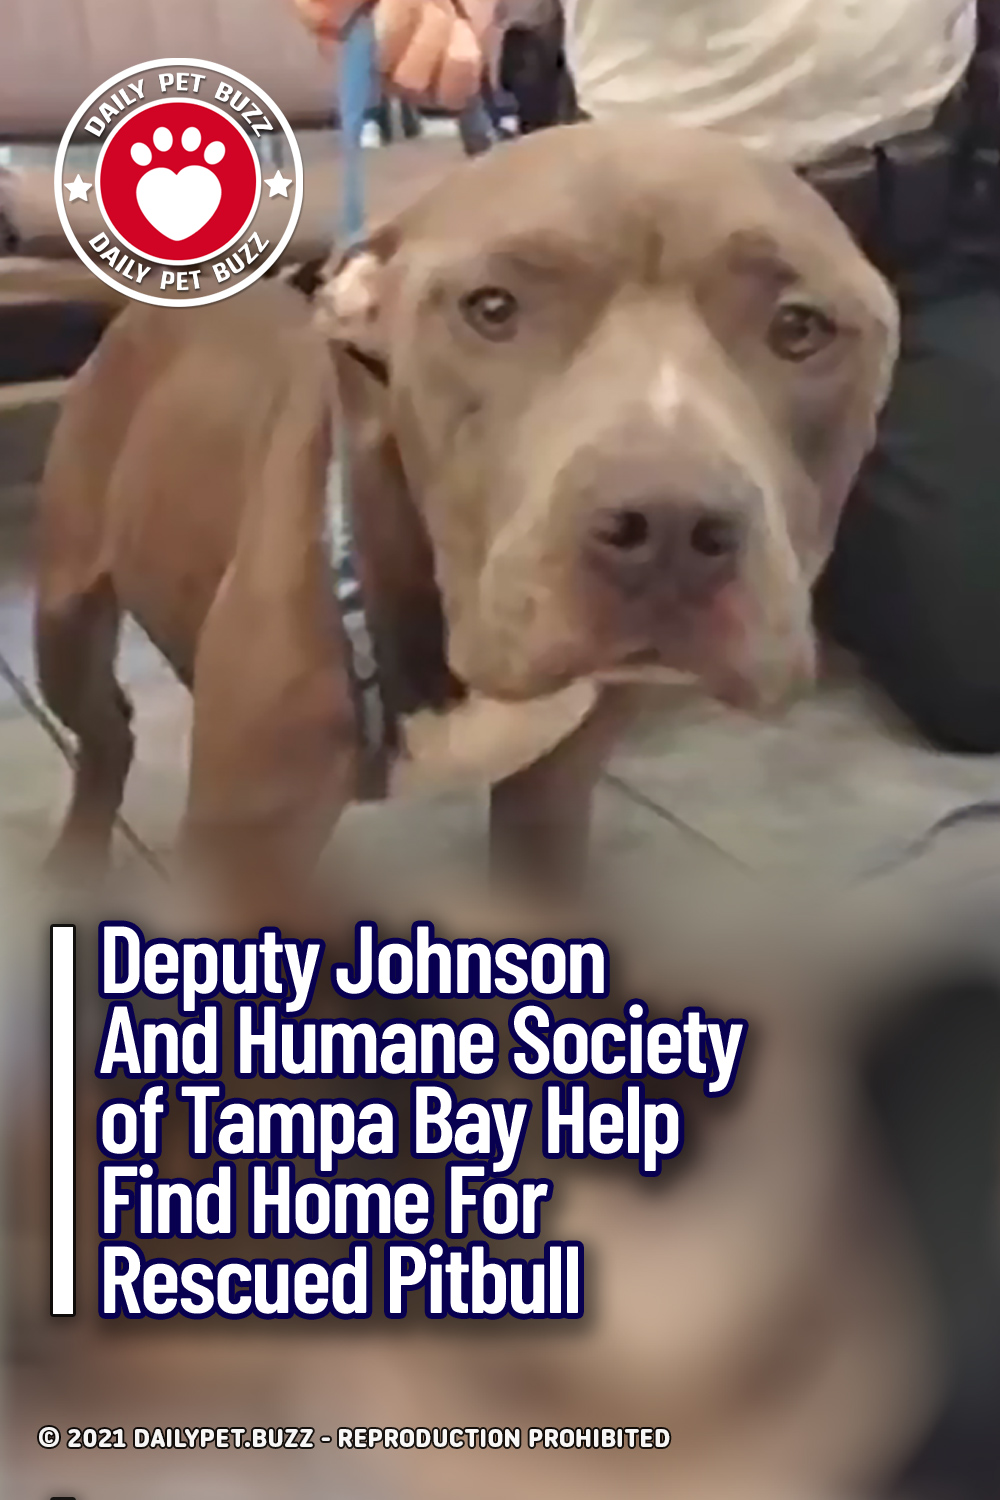 Deputy Johnson And Humane Society of Tampa Bay Help Find Home For Rescued Pitbull